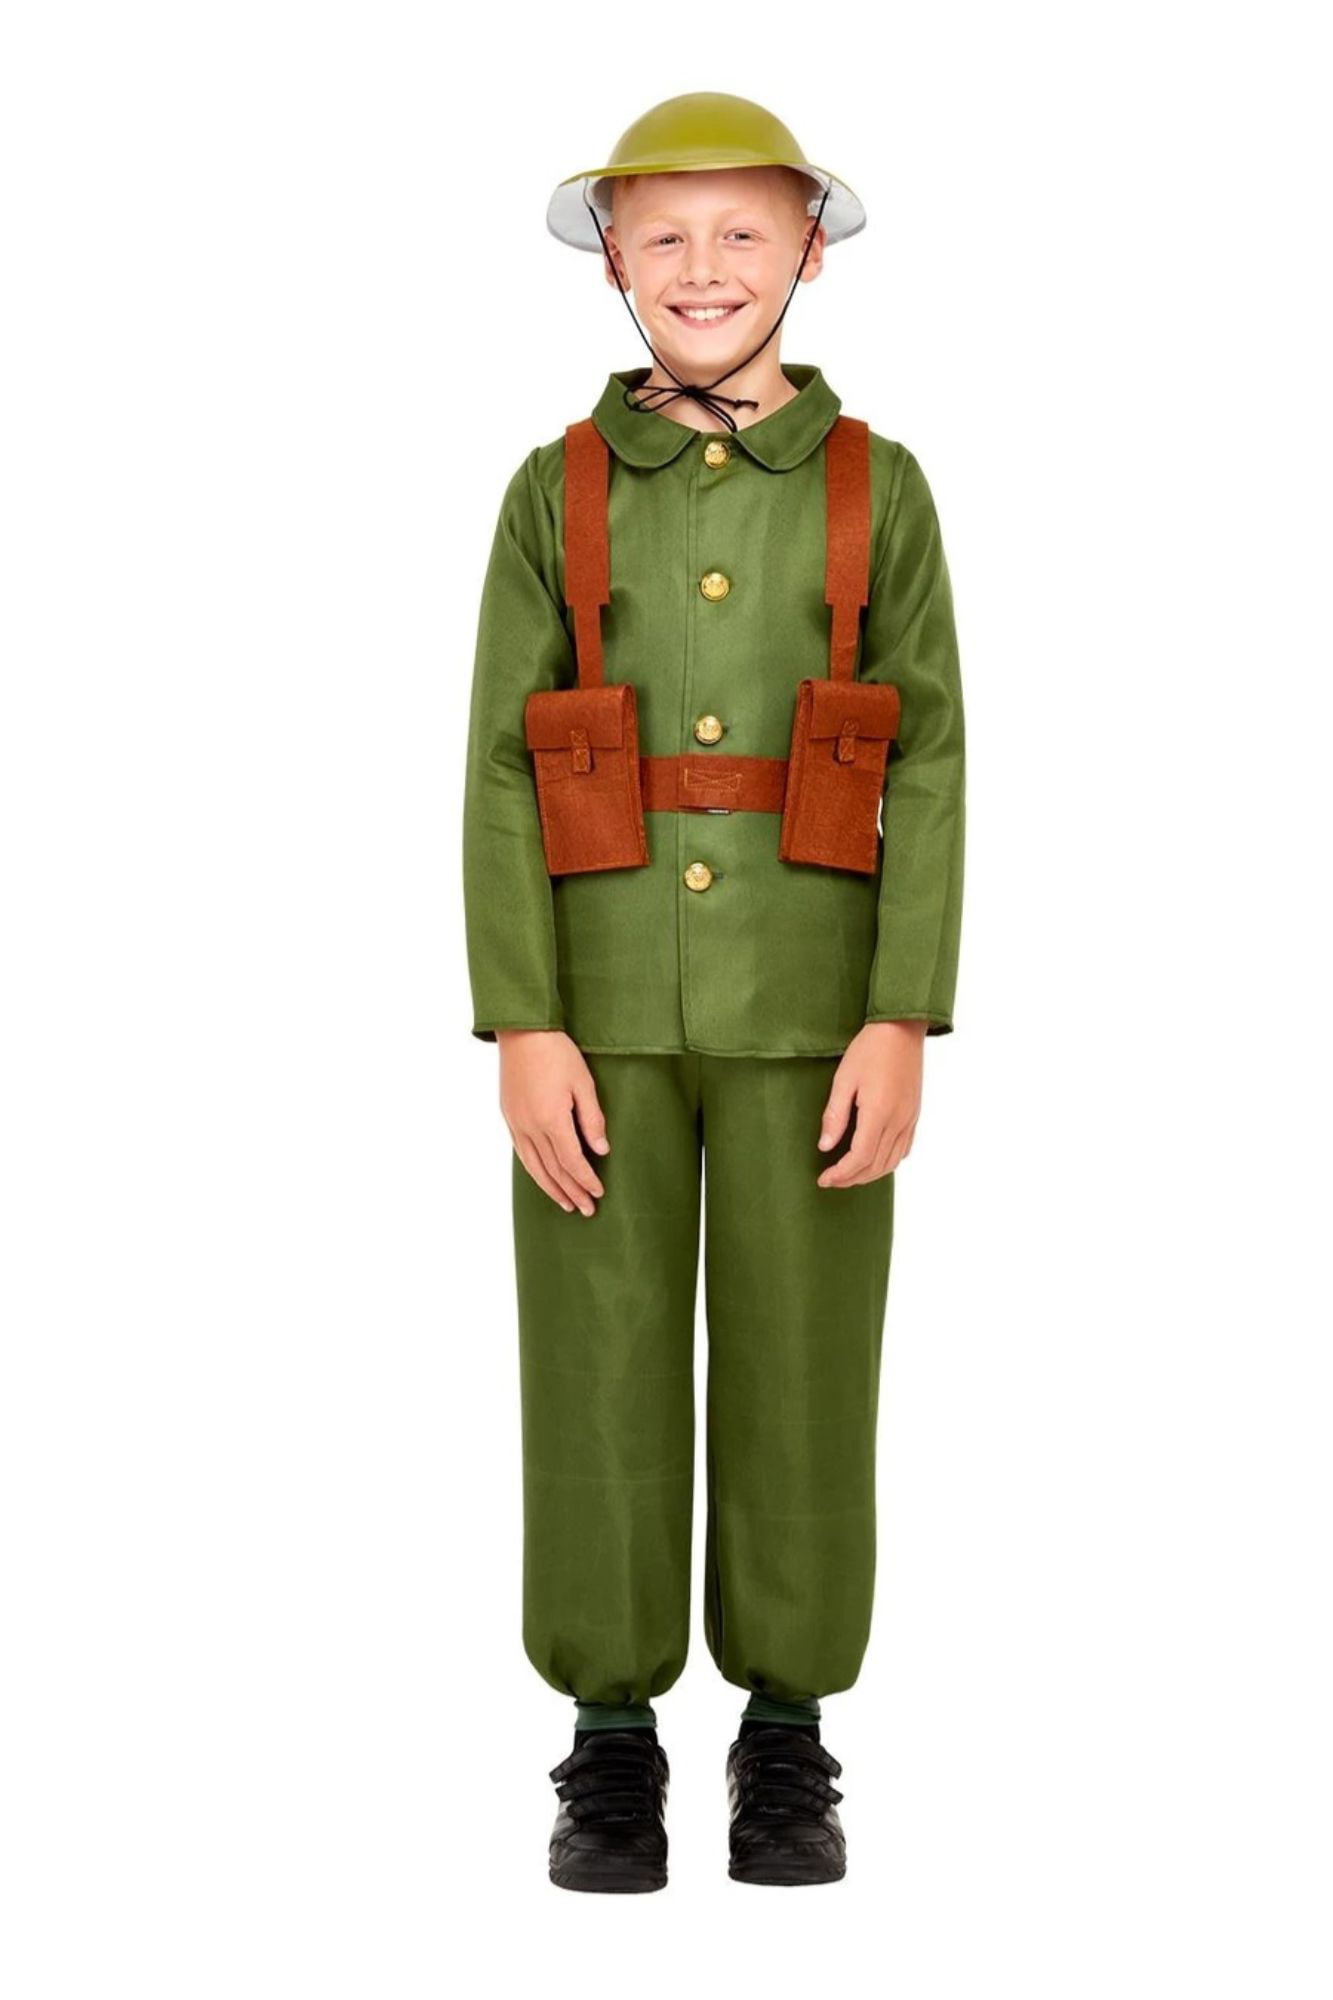 WW1 Army Soldier Boys Fancy Dress Military Uniform Childrens Kids Costume Outfit